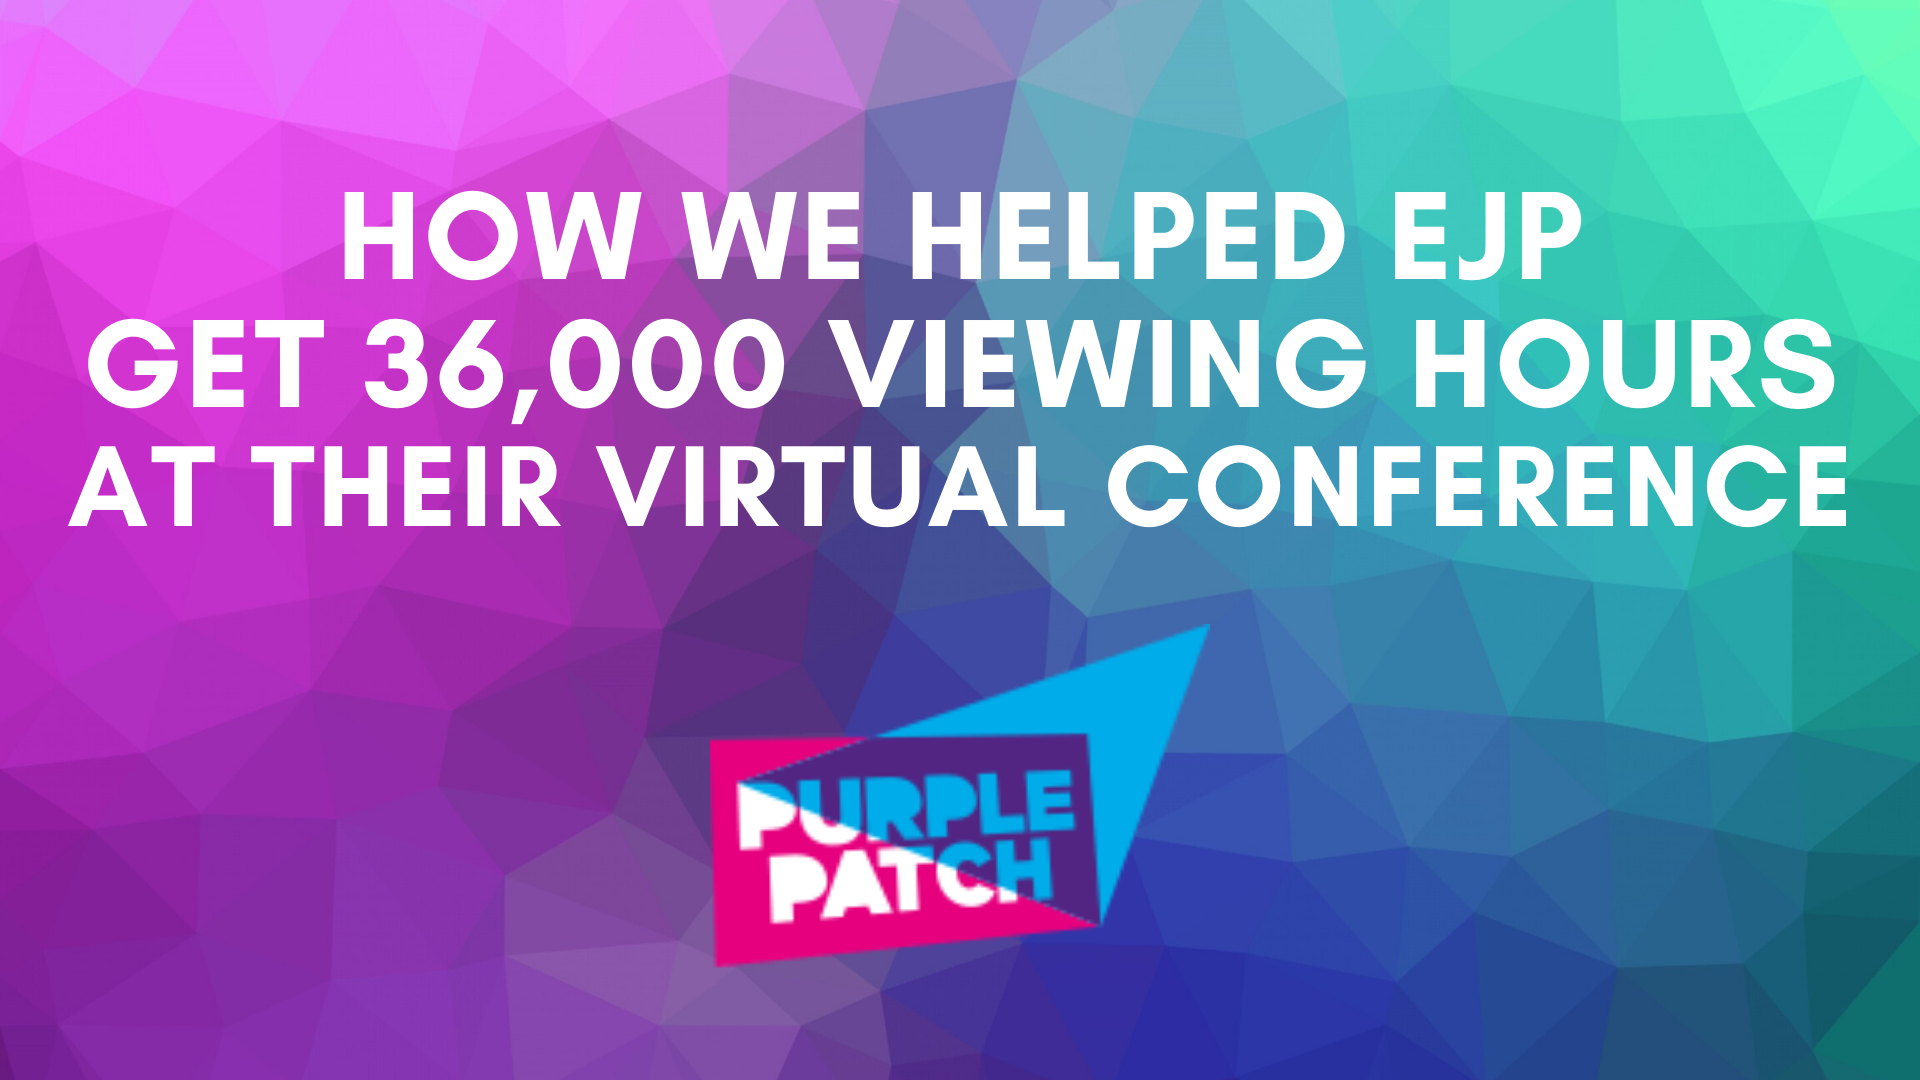 How We Helped EJP Get 36,000 Viewing Hours At Their Virtual Conference